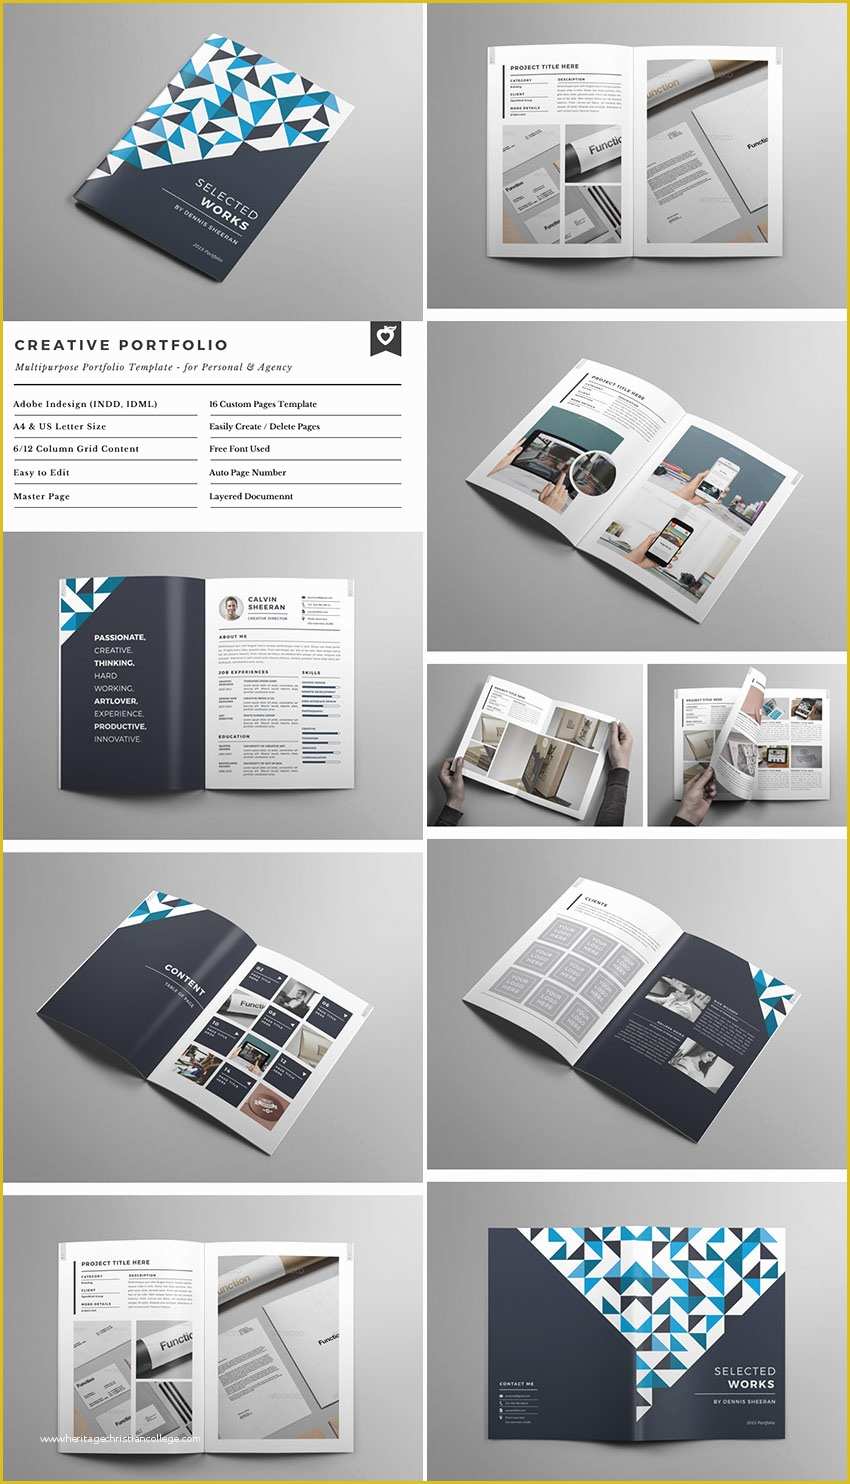 Free Indesign Portfolio Layout Templates Of 20 Best Indesign Brochure Templates for Creative